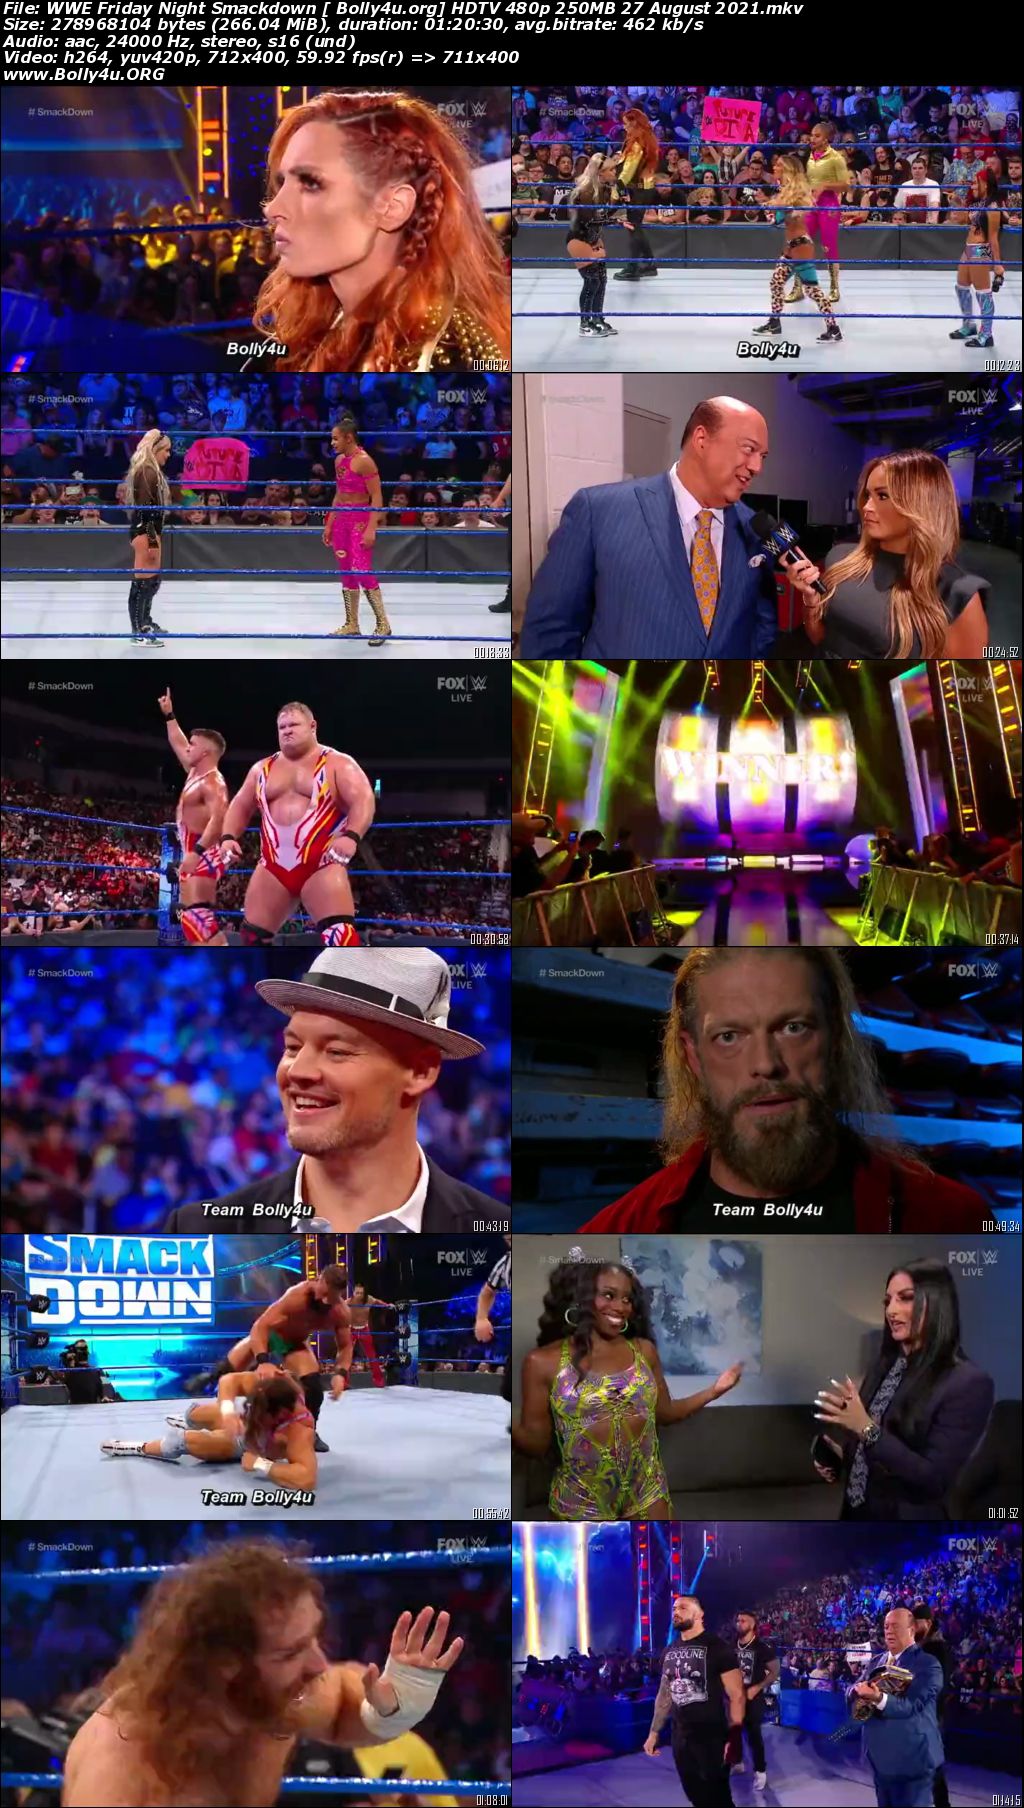 WWE Friday Night Smackdown HDTV 480p 250MB 27 August 2021 Download